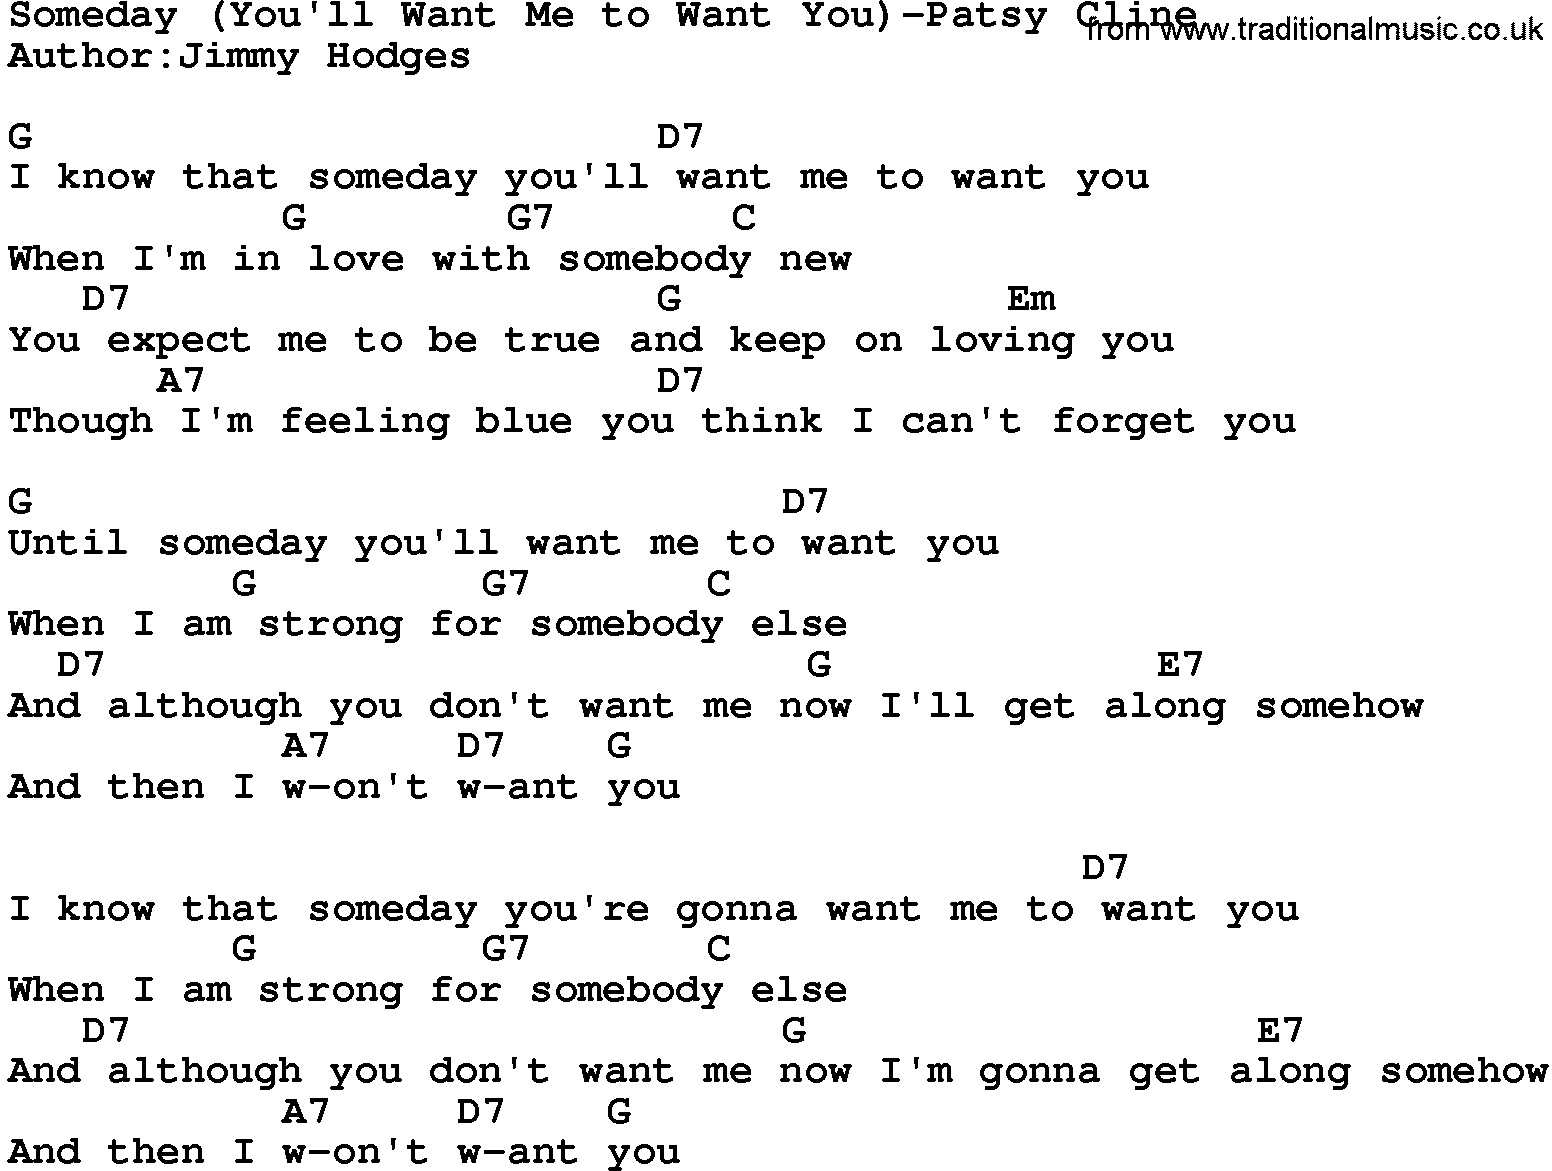 Country music song: Someday(You'll Want Me To Want You)-Patsy Cline lyrics and chords